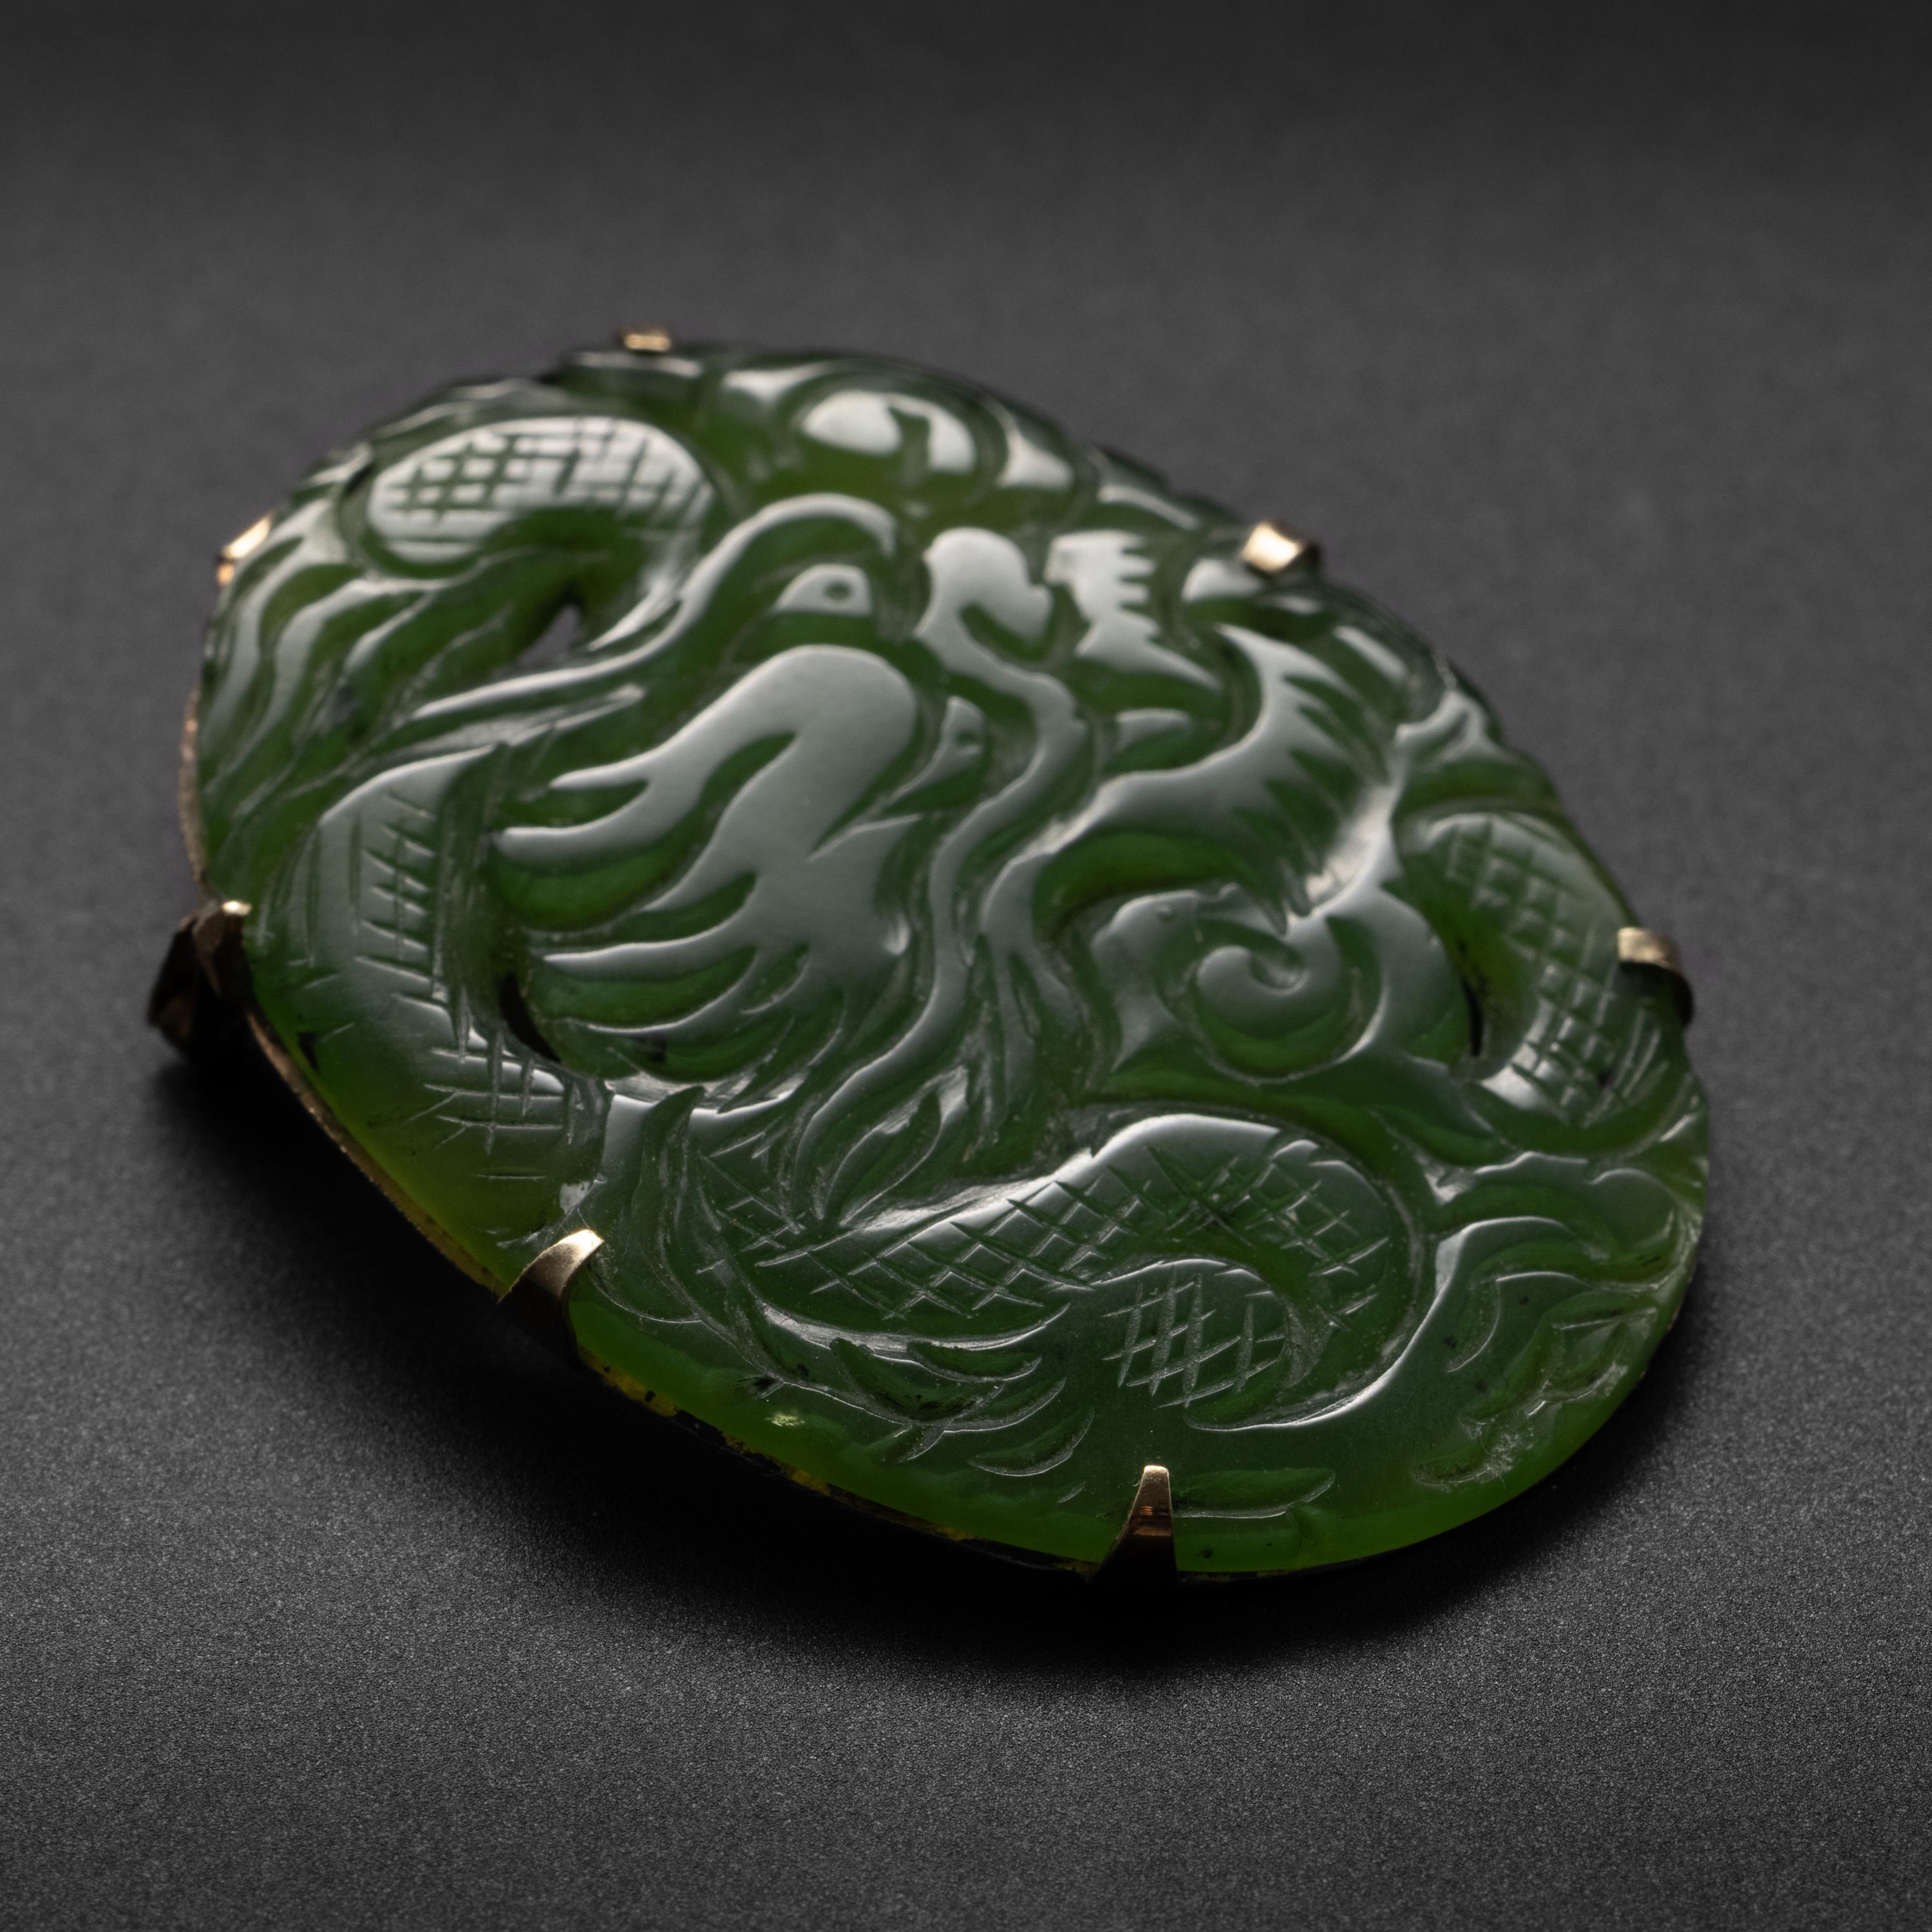 Uncommonly translucent nephrite jade with exceptionally fine coloring has been skilfully carved into the form of an expressive dragon contained within an oval form.

The 40.56mm x 29.72mm x 2.82mm nephrite is so translucent you can see your finger